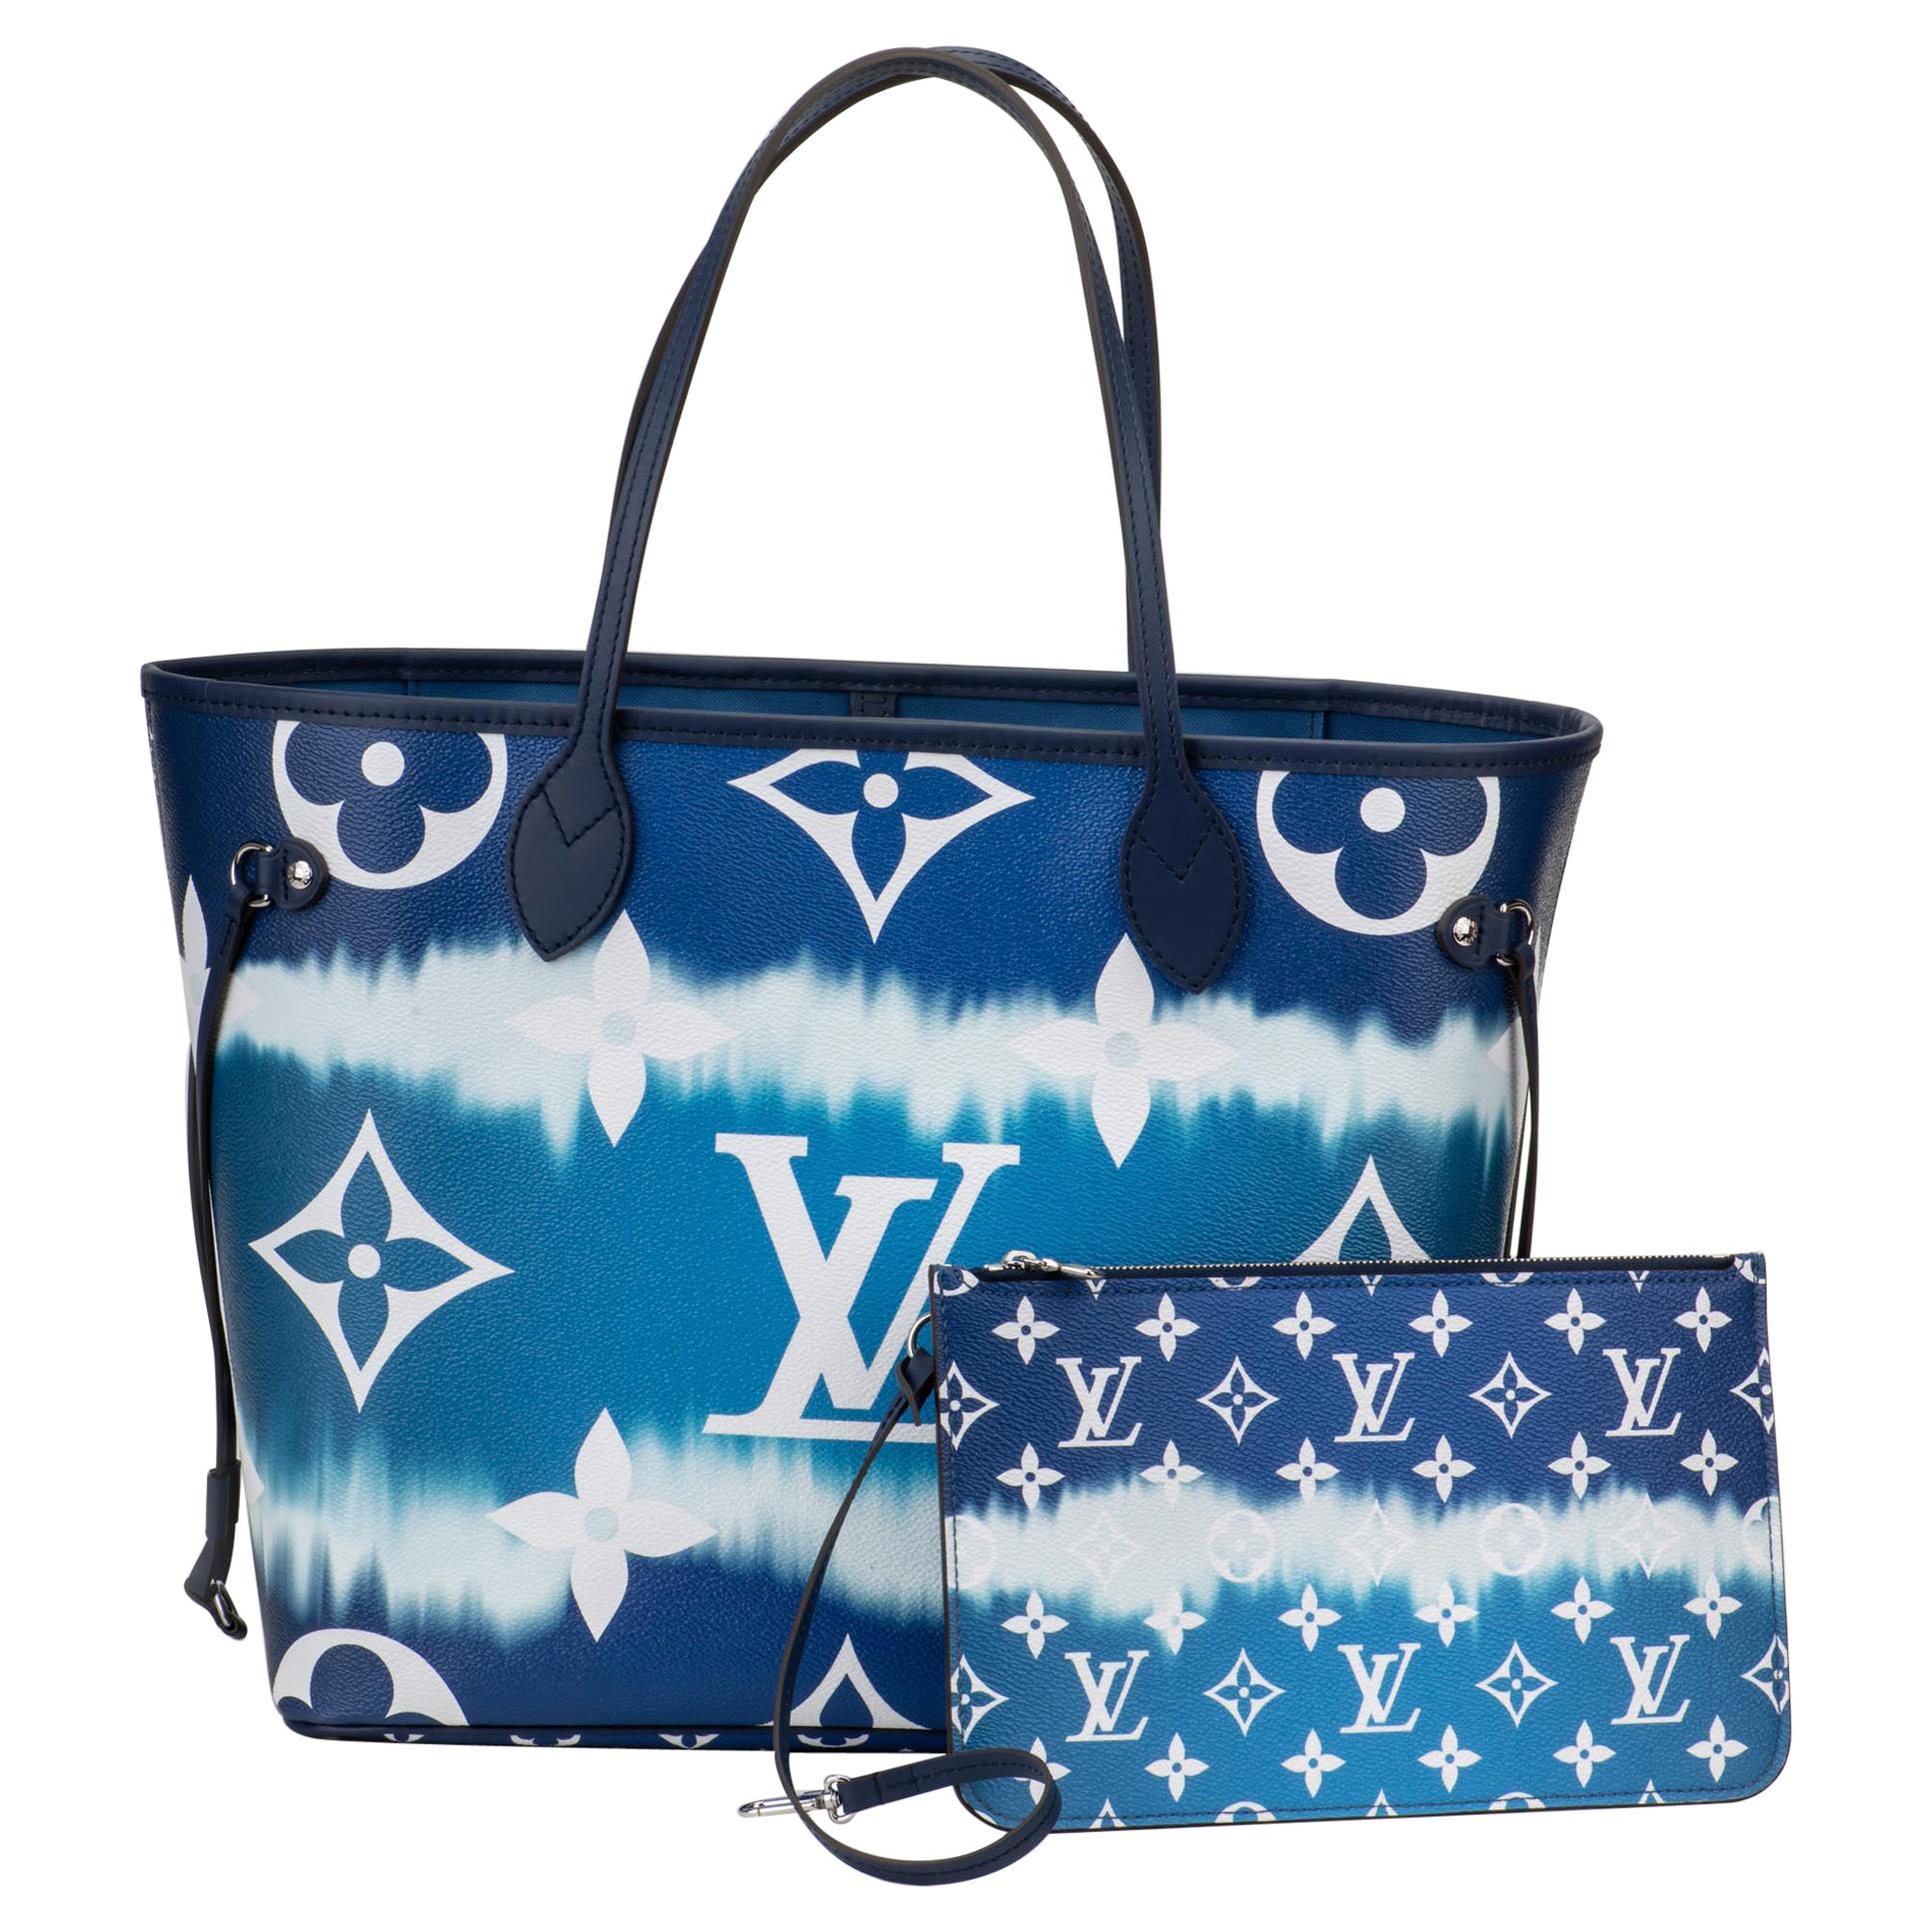 New in Box Louis Vuitton Limited Edition Escale Blue Neverfull Tote Bag